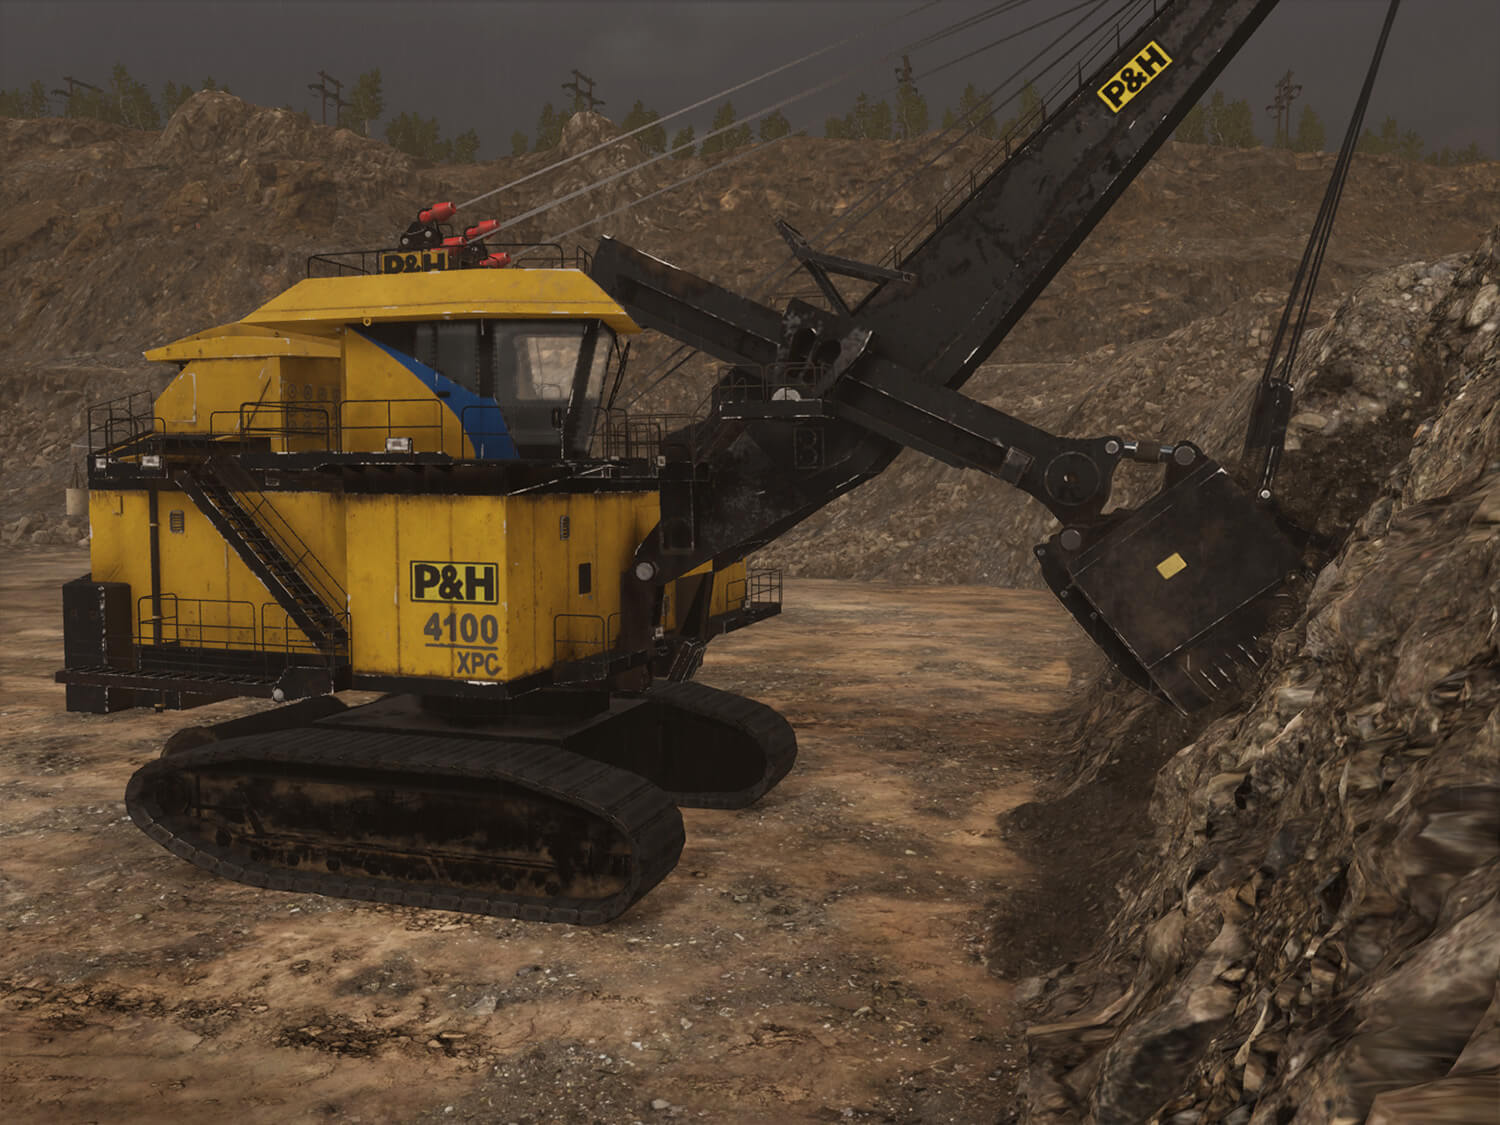 Komatsu P&H 4100XPC & 4800XPC Electric Rope Shovels (Next Gen Seat and Controls) Training for adverse weather